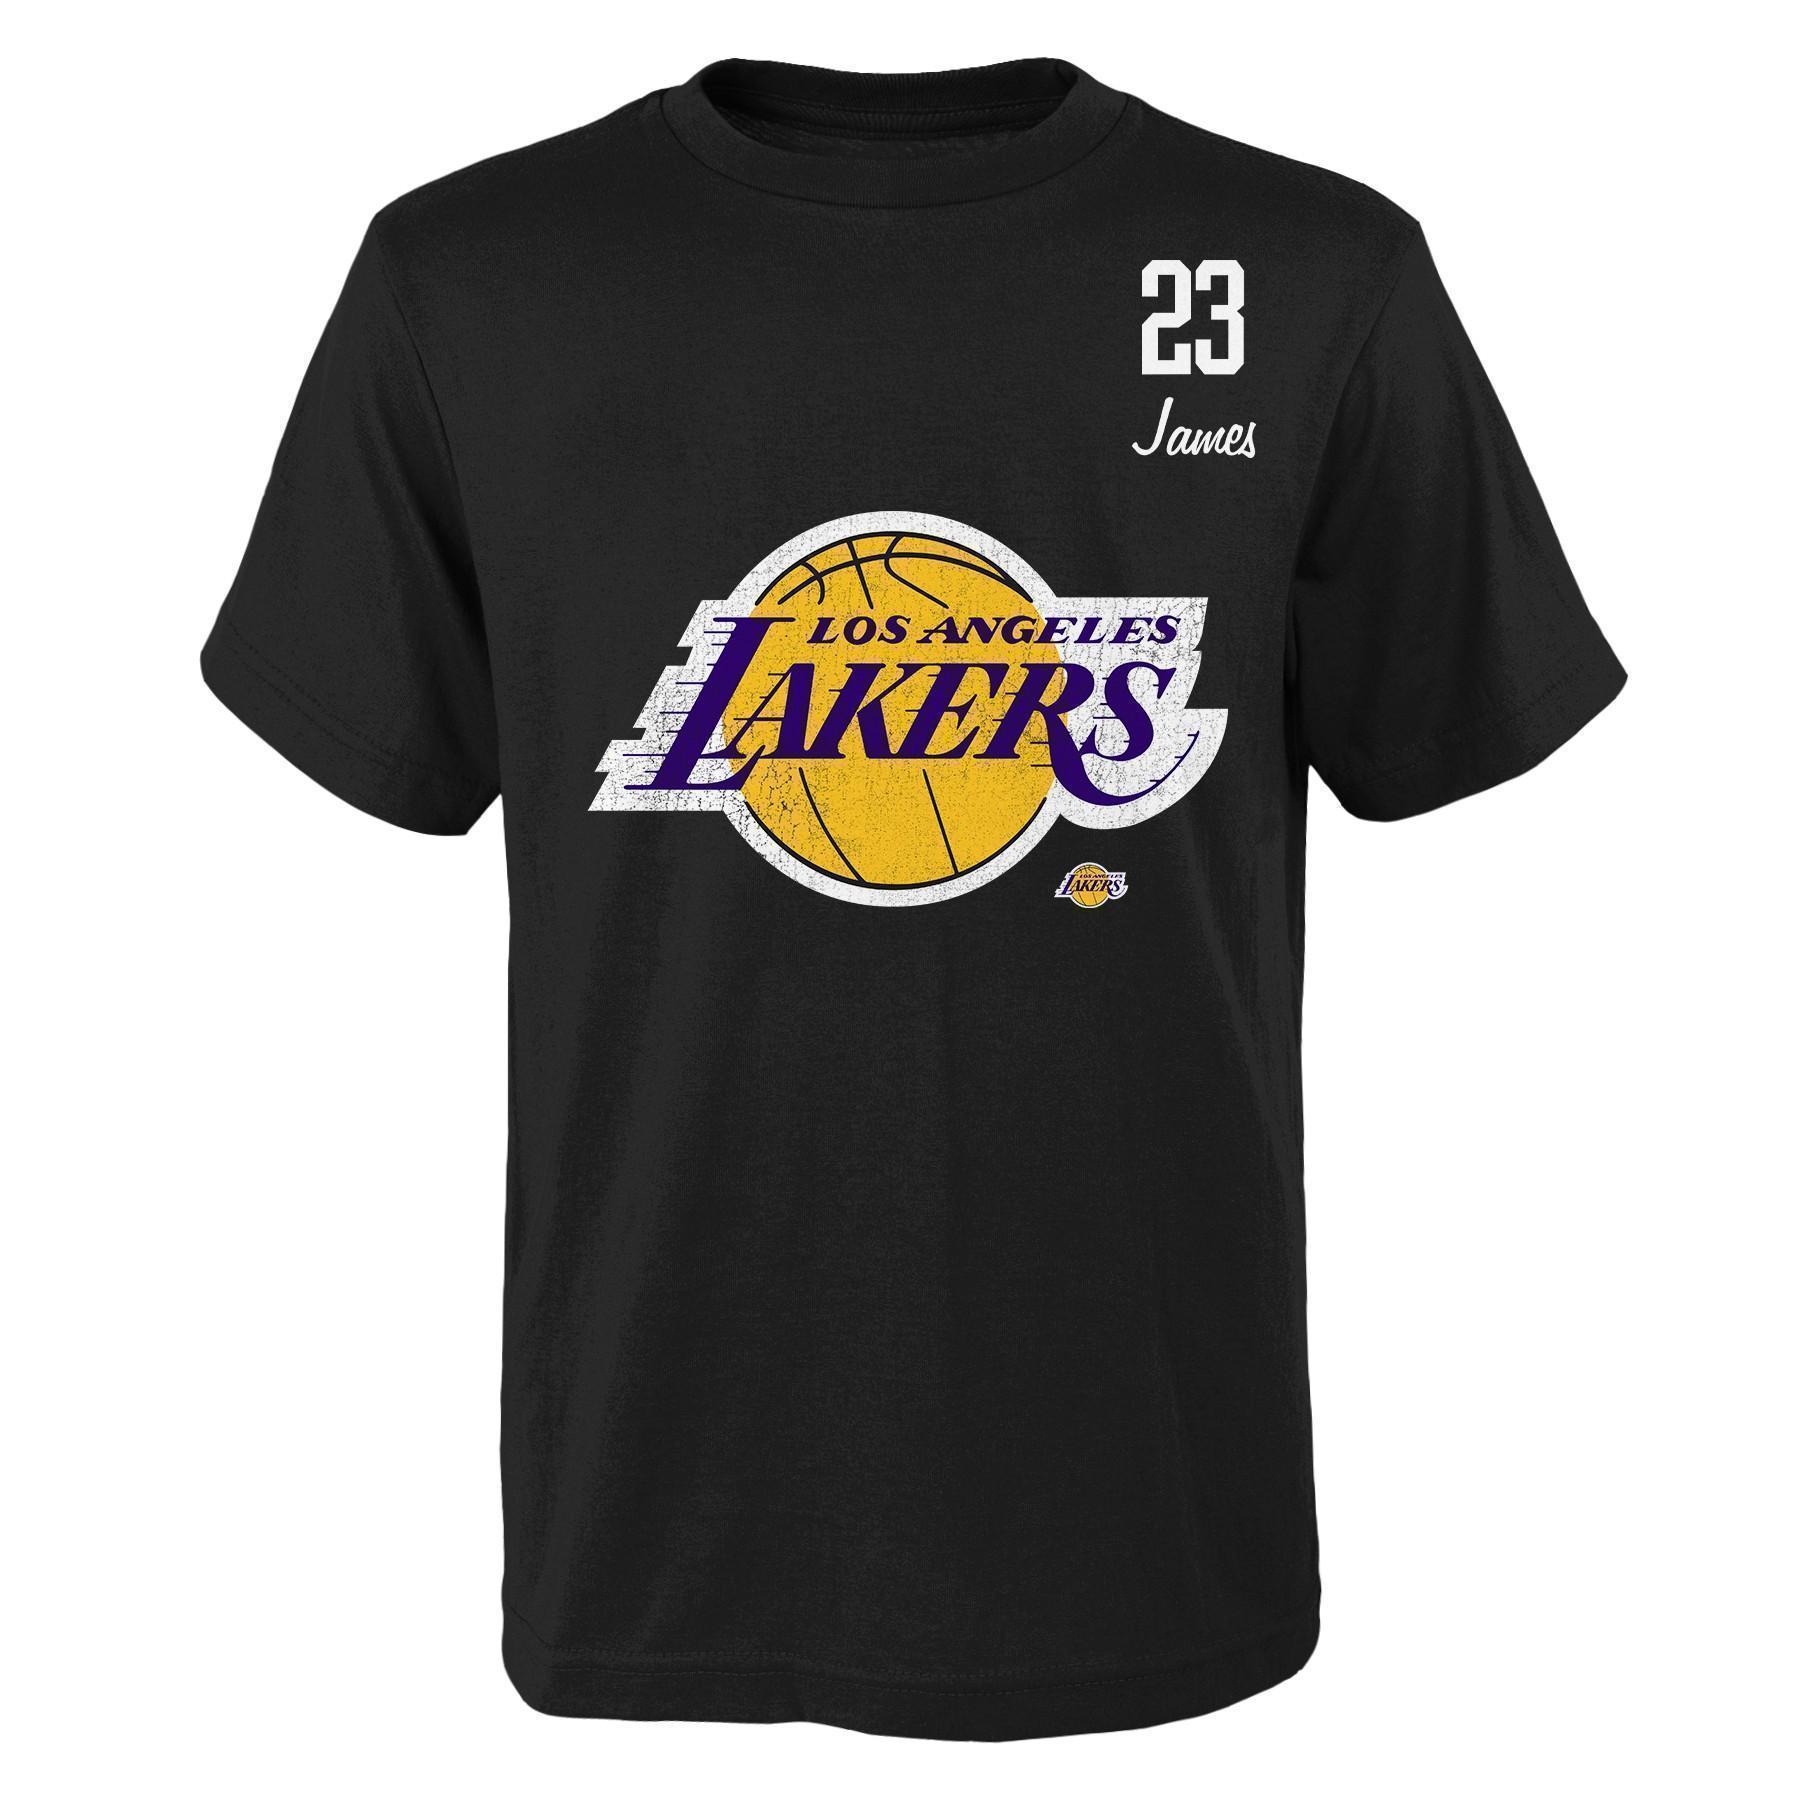 Children's jersey Outerstuff Player NBA Los Angeles Lakers Lebron James